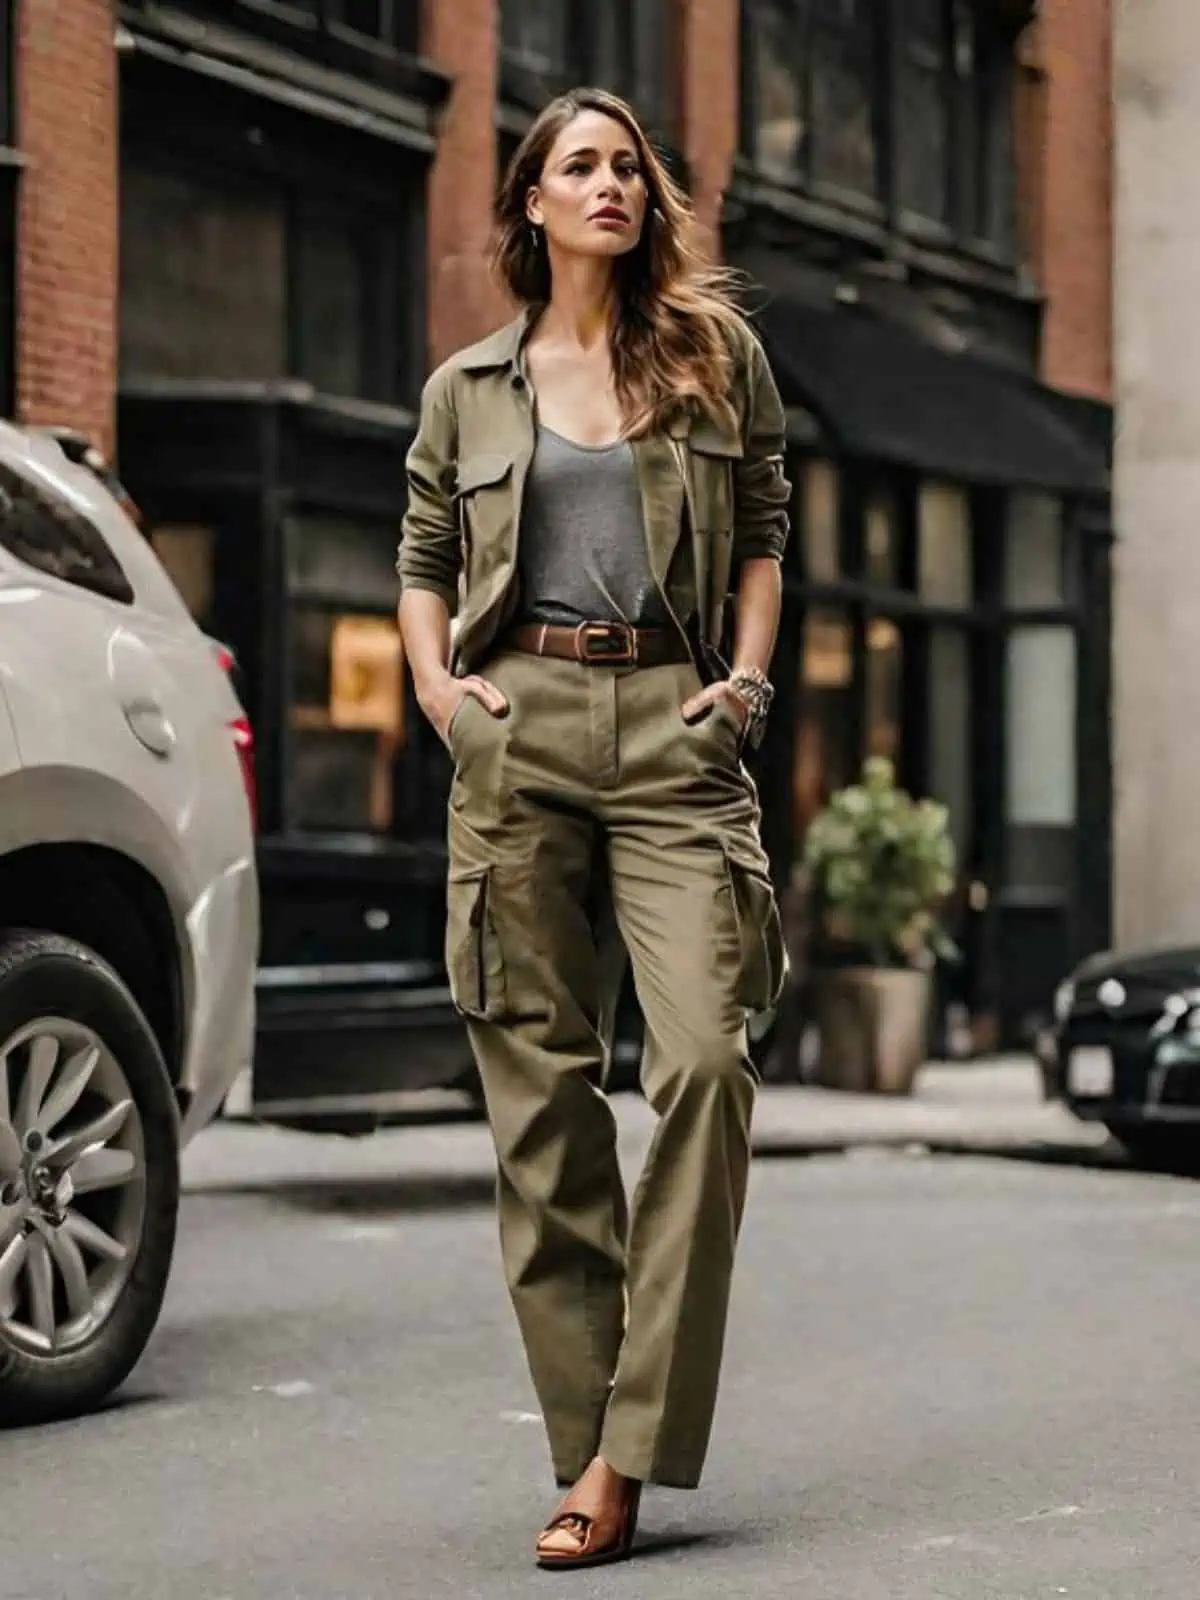 Cargo Pants - Check Out the Latest Styles Here